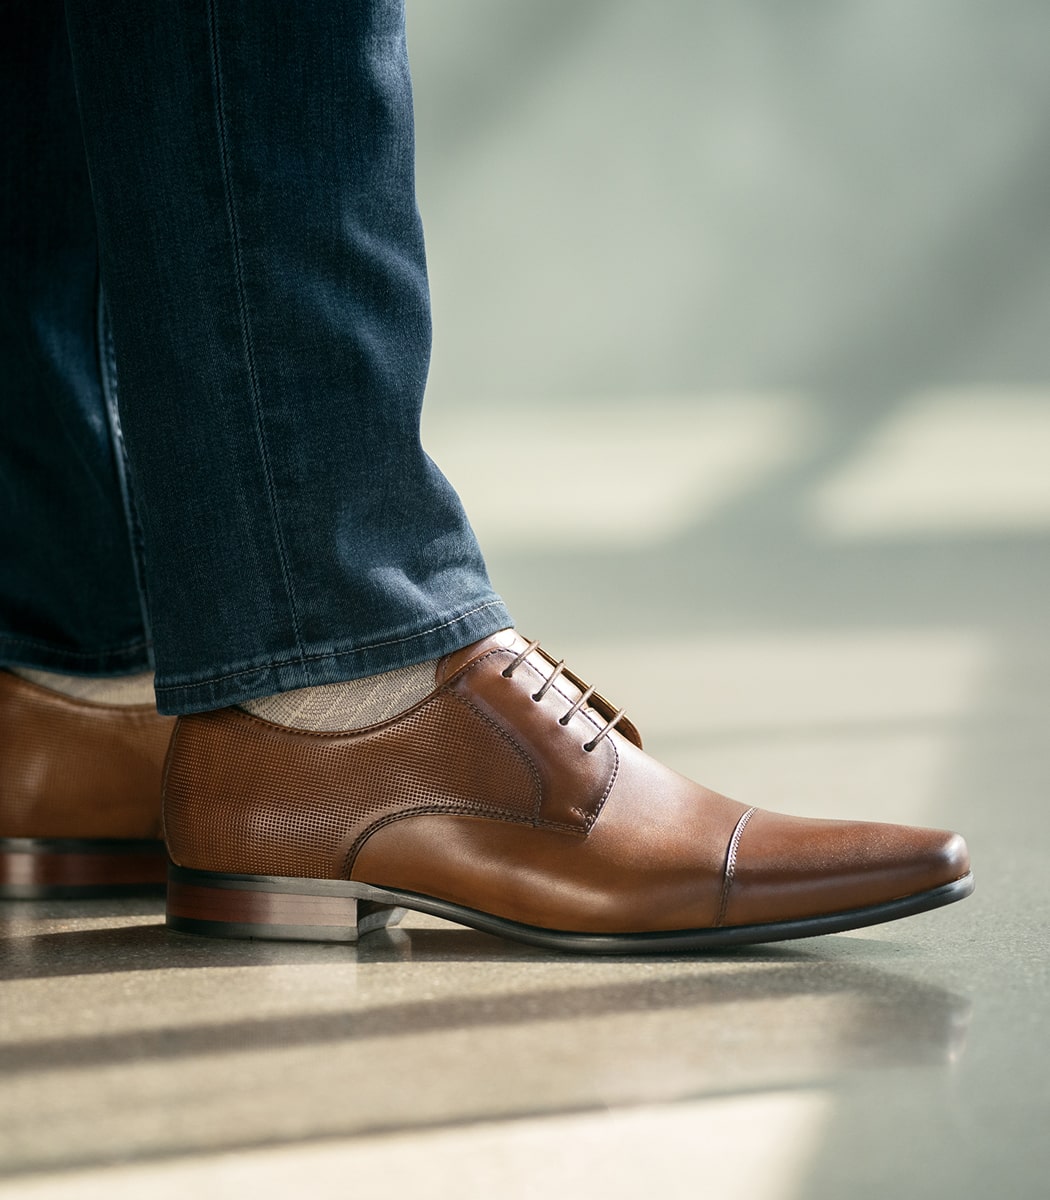 The featured image is a model wearing the Postino Cap Toe Balmoral Oxford in Cognac Smooth. 